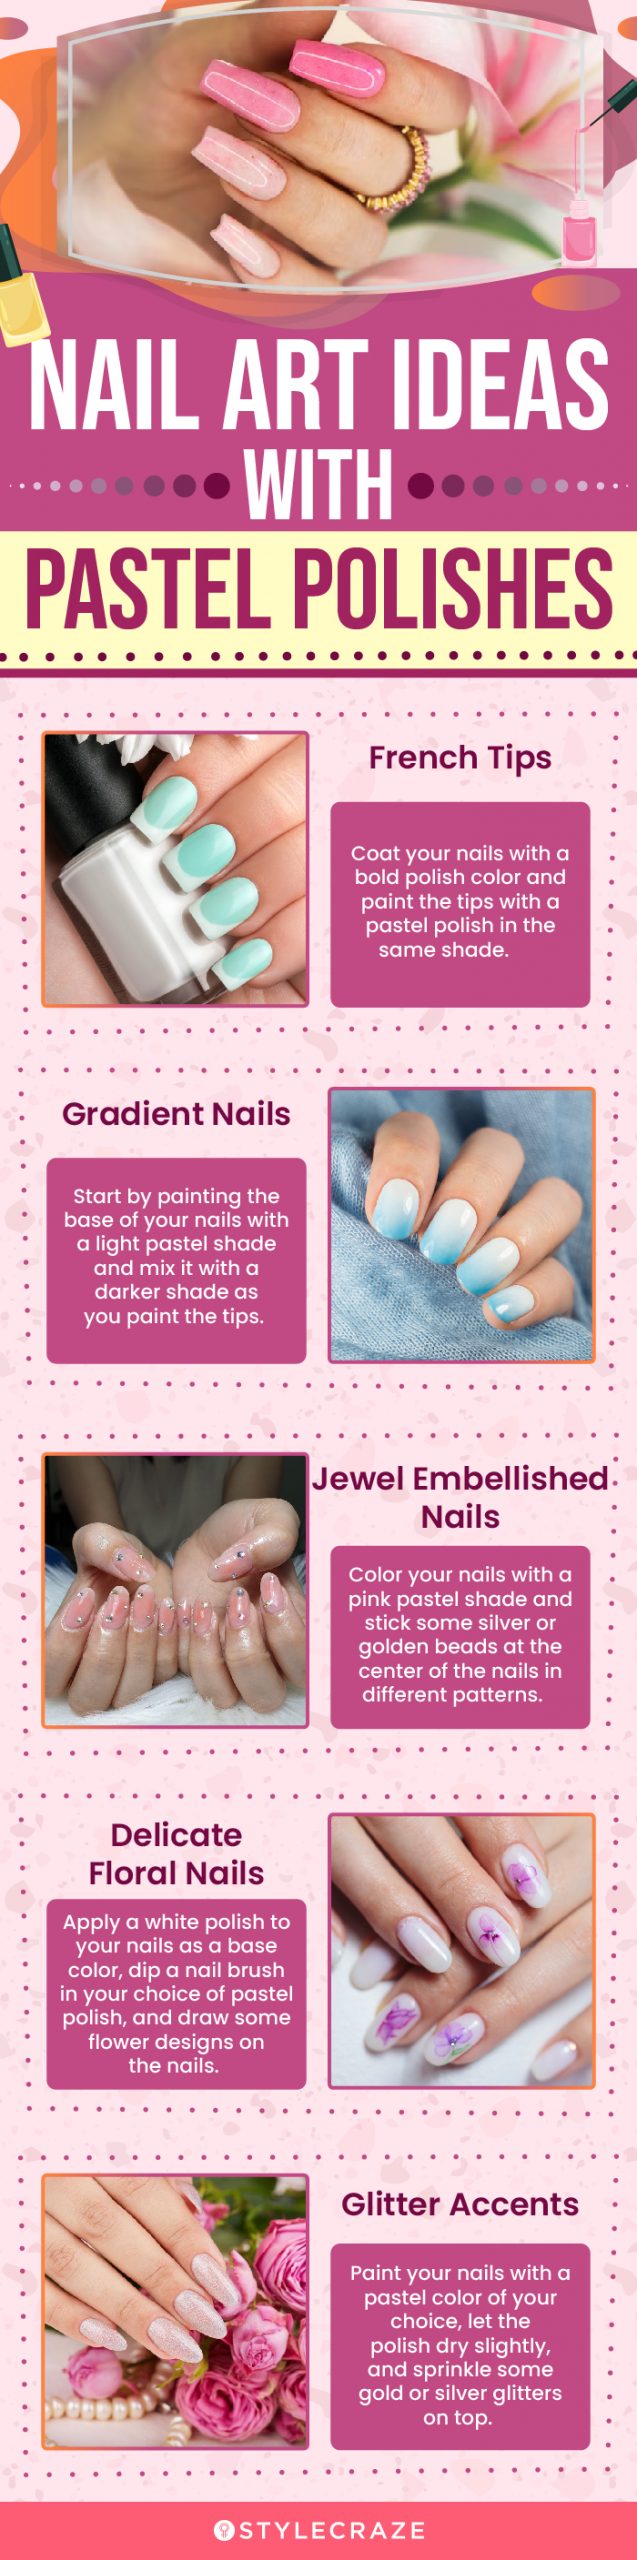 Nail Art Ideas With Pastel Polishes (infographic)